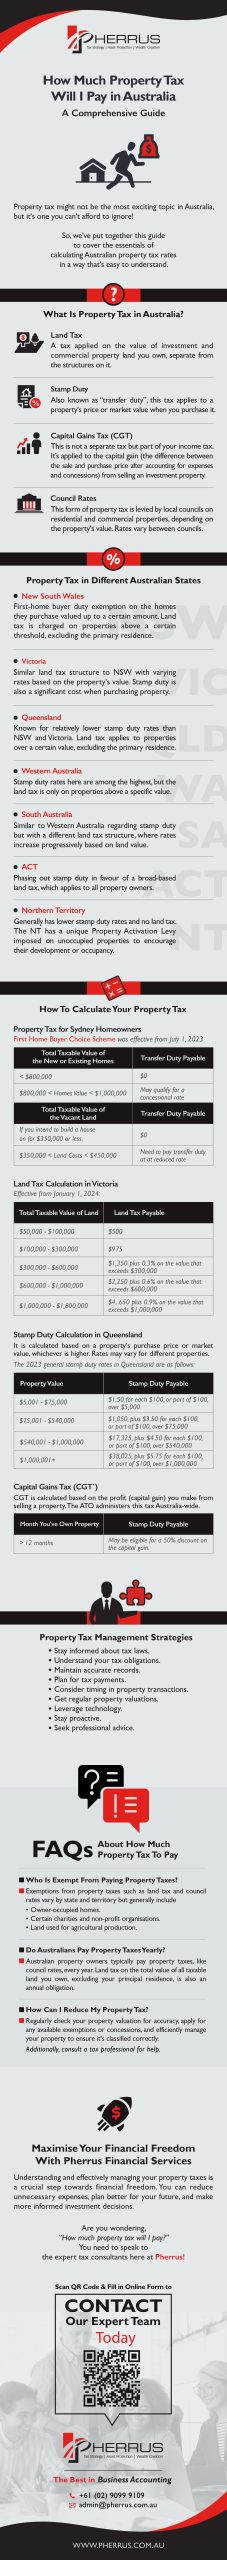 How Much Property Tax Will I Pay in Australia - Infographic